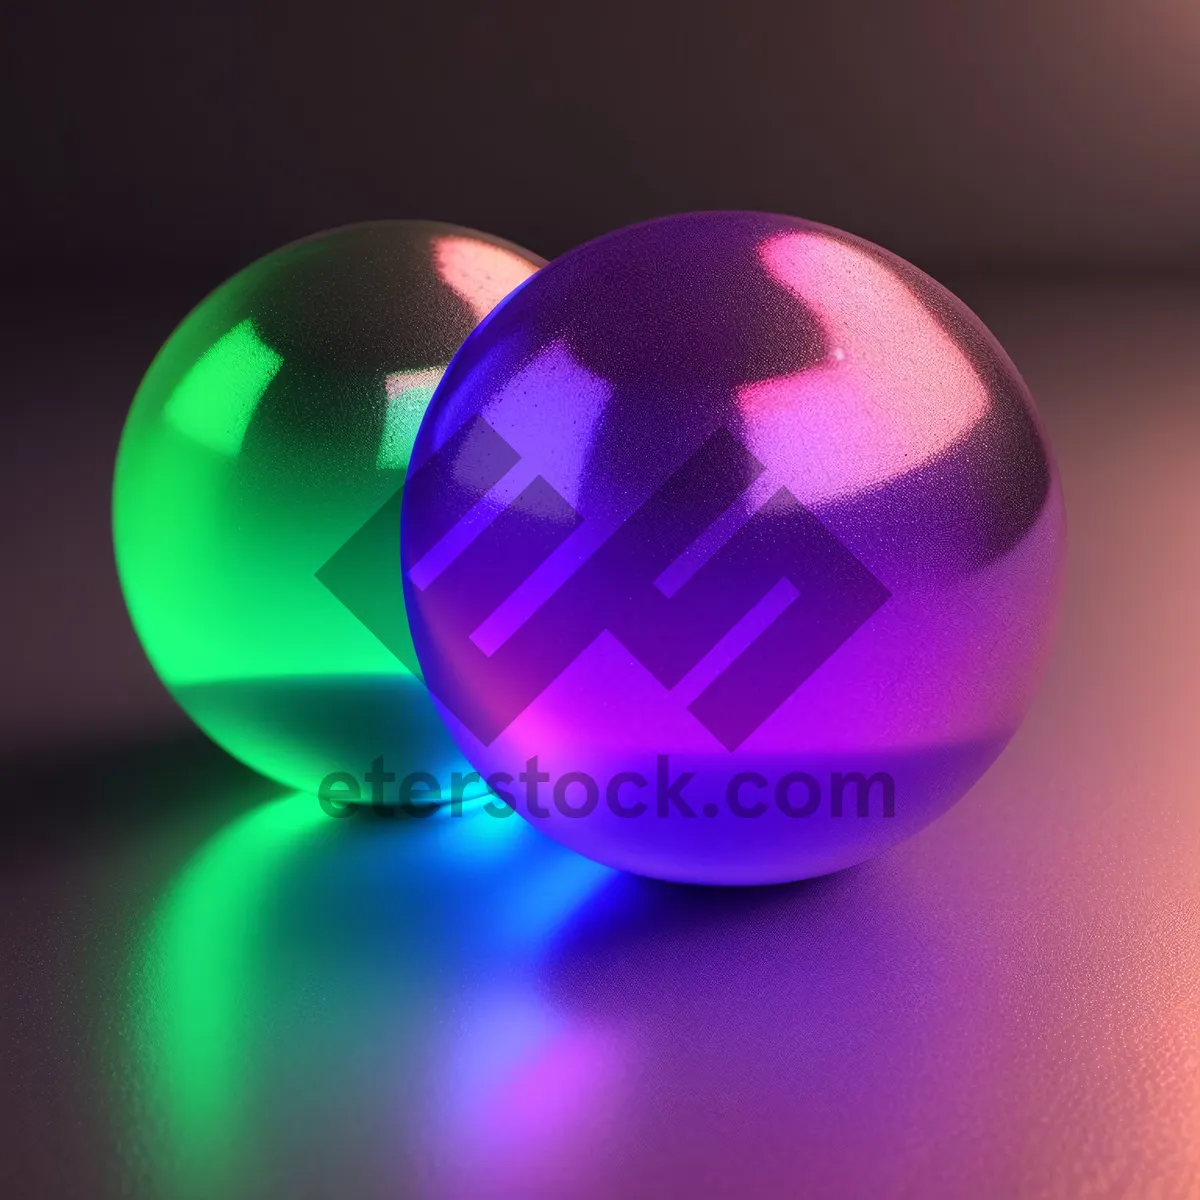 Picture of Glossy Glass Sphere Reflection Design Element